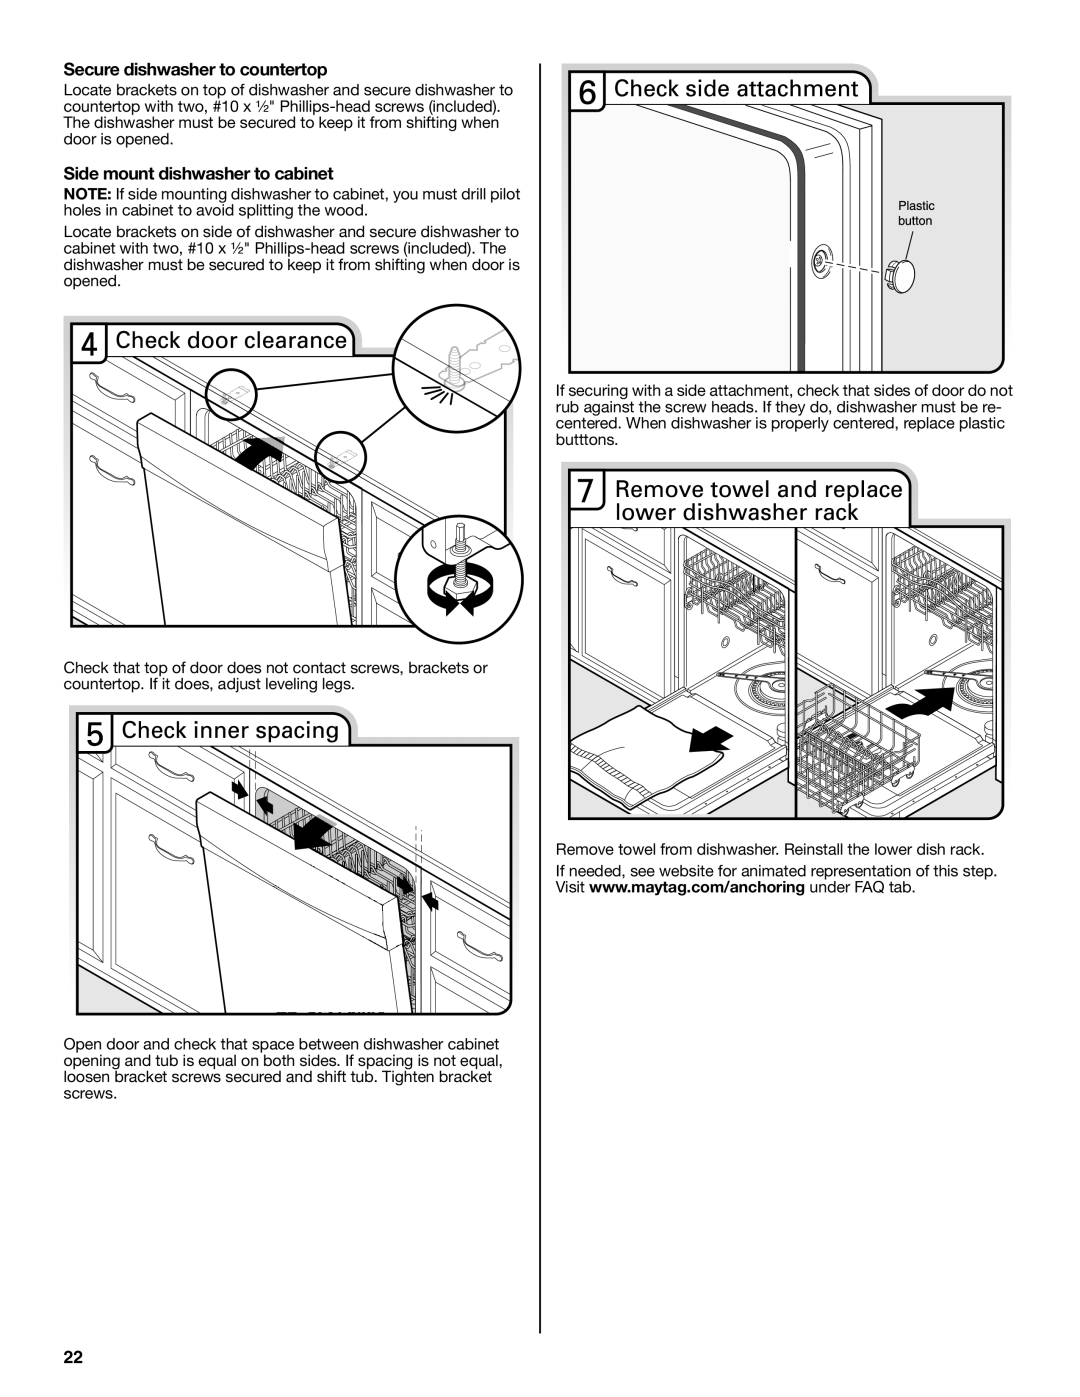 Maytag W10649077A installation instructions Secure dishwasher to countertop, Side mount dishwasher to cabinet 